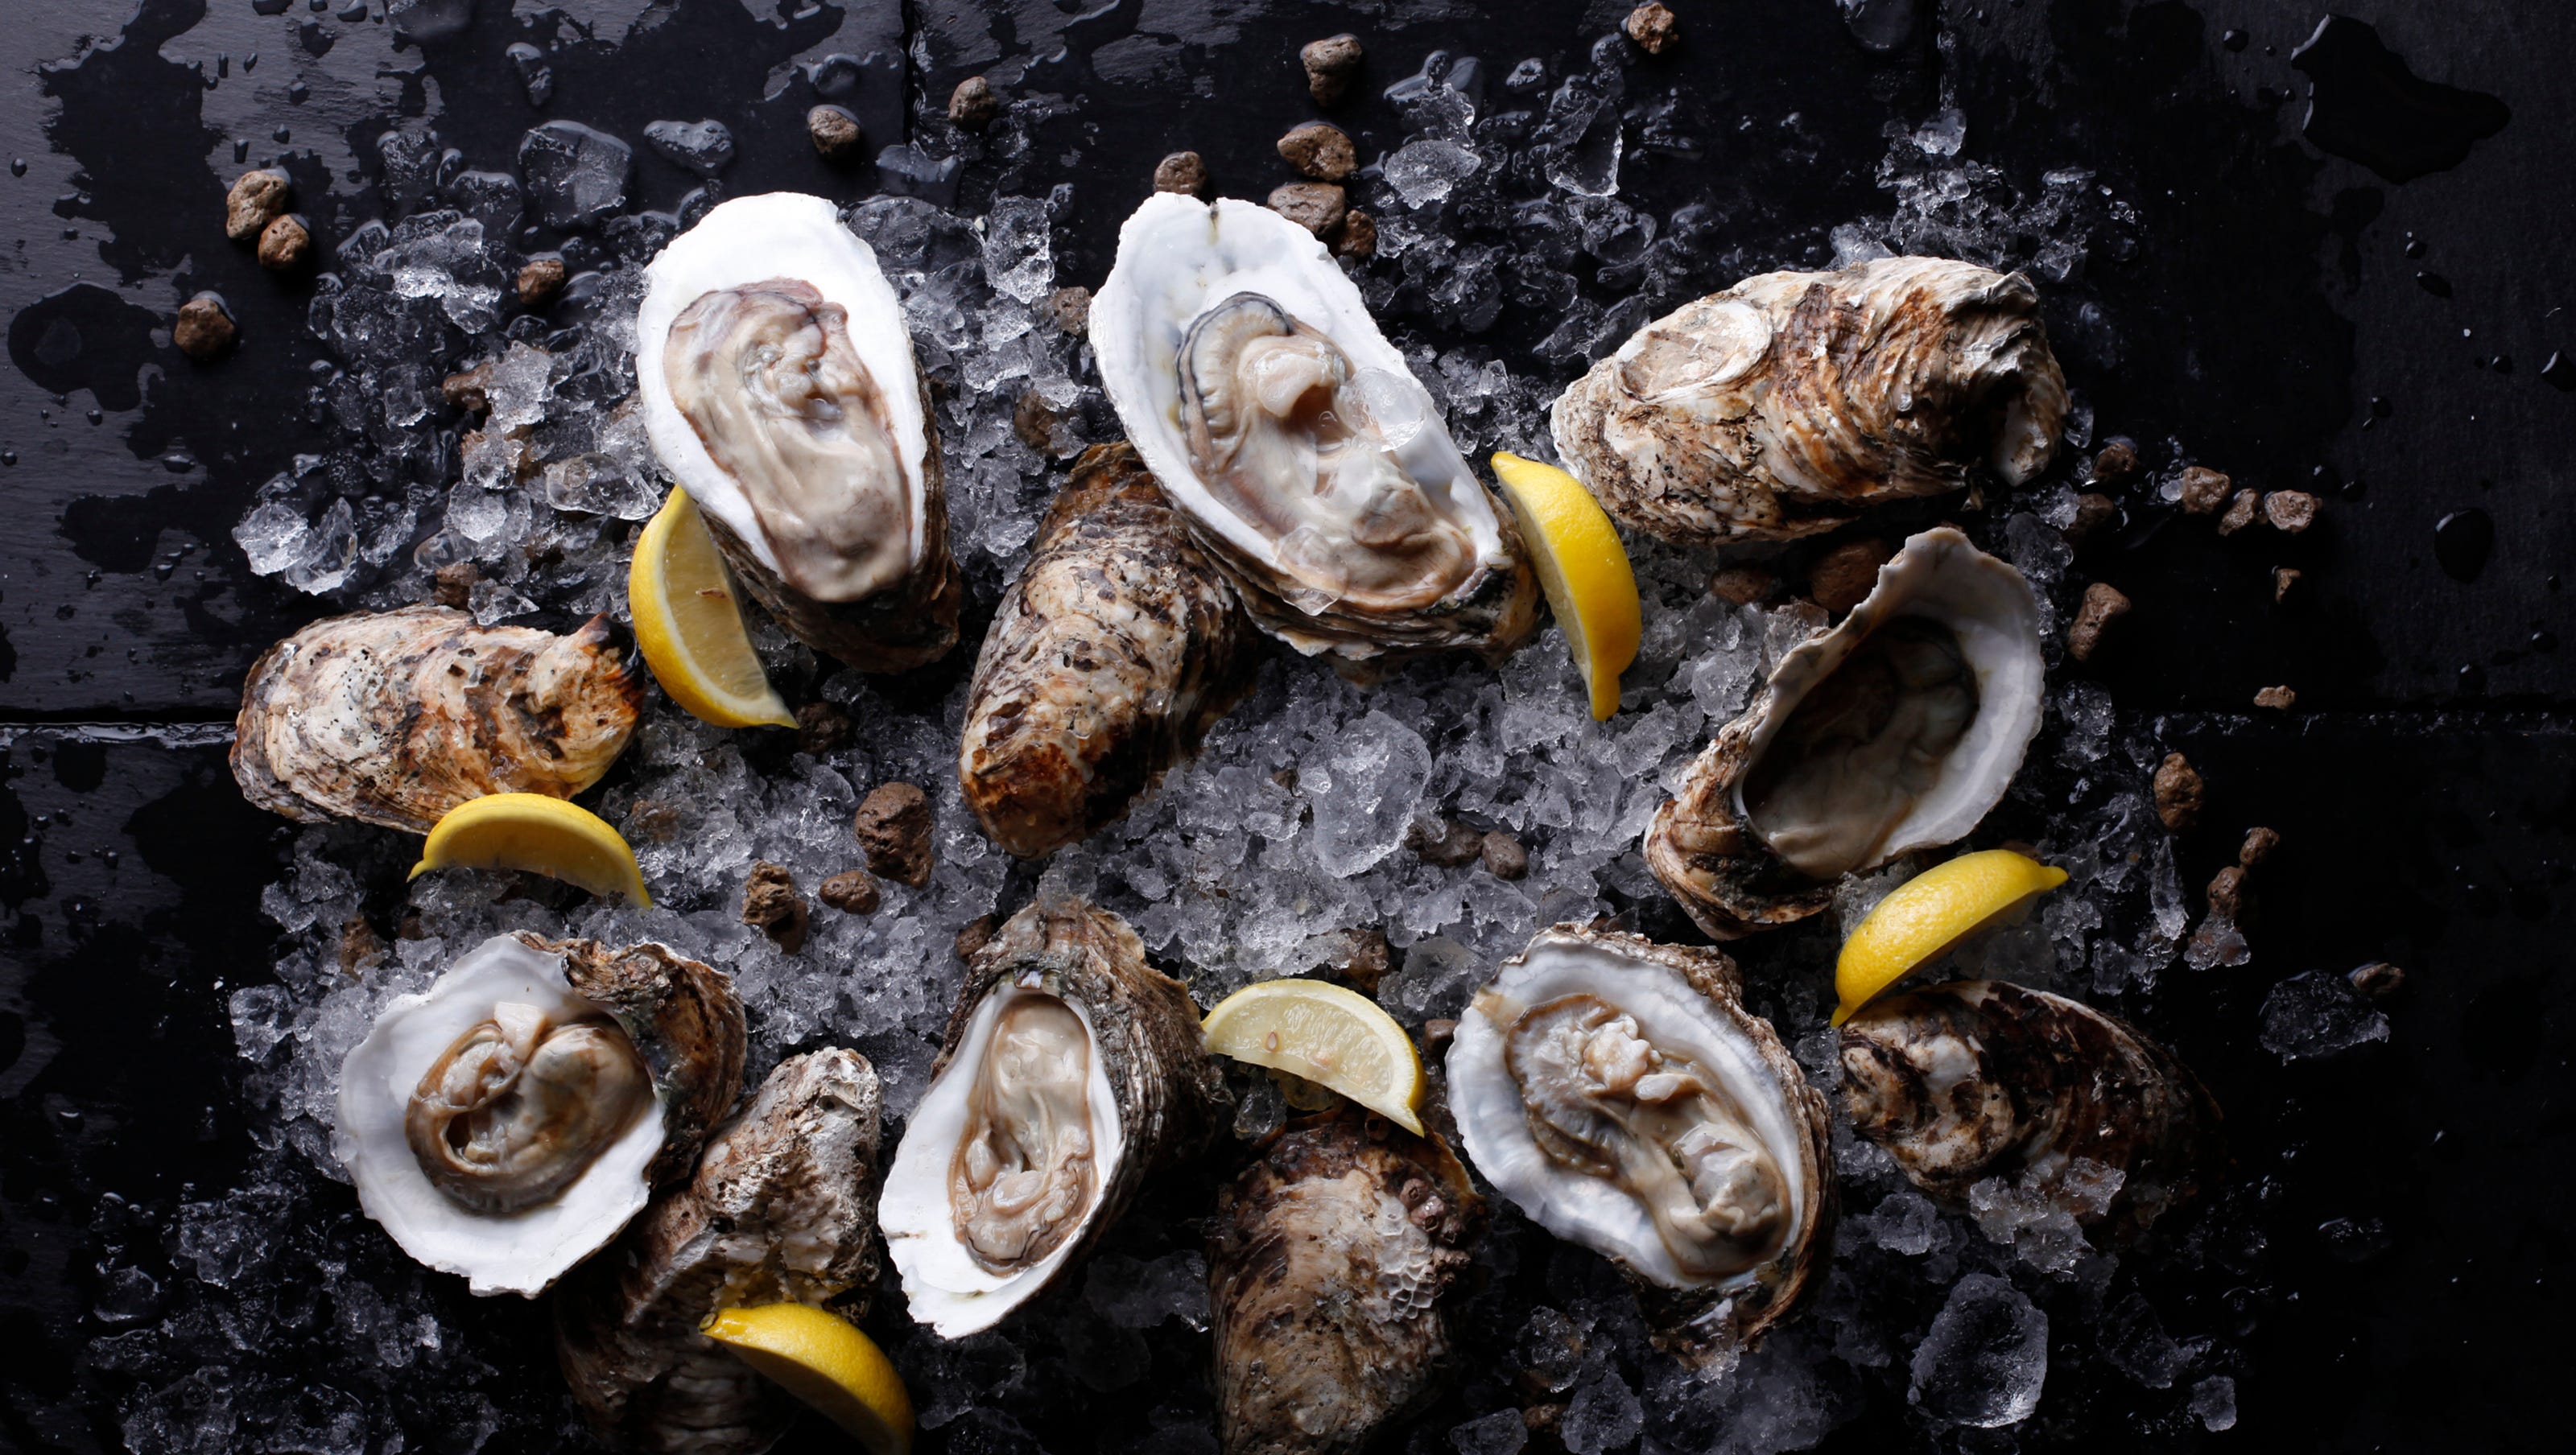 Woman Dies From Flesh Eating Bacteria In Oysters